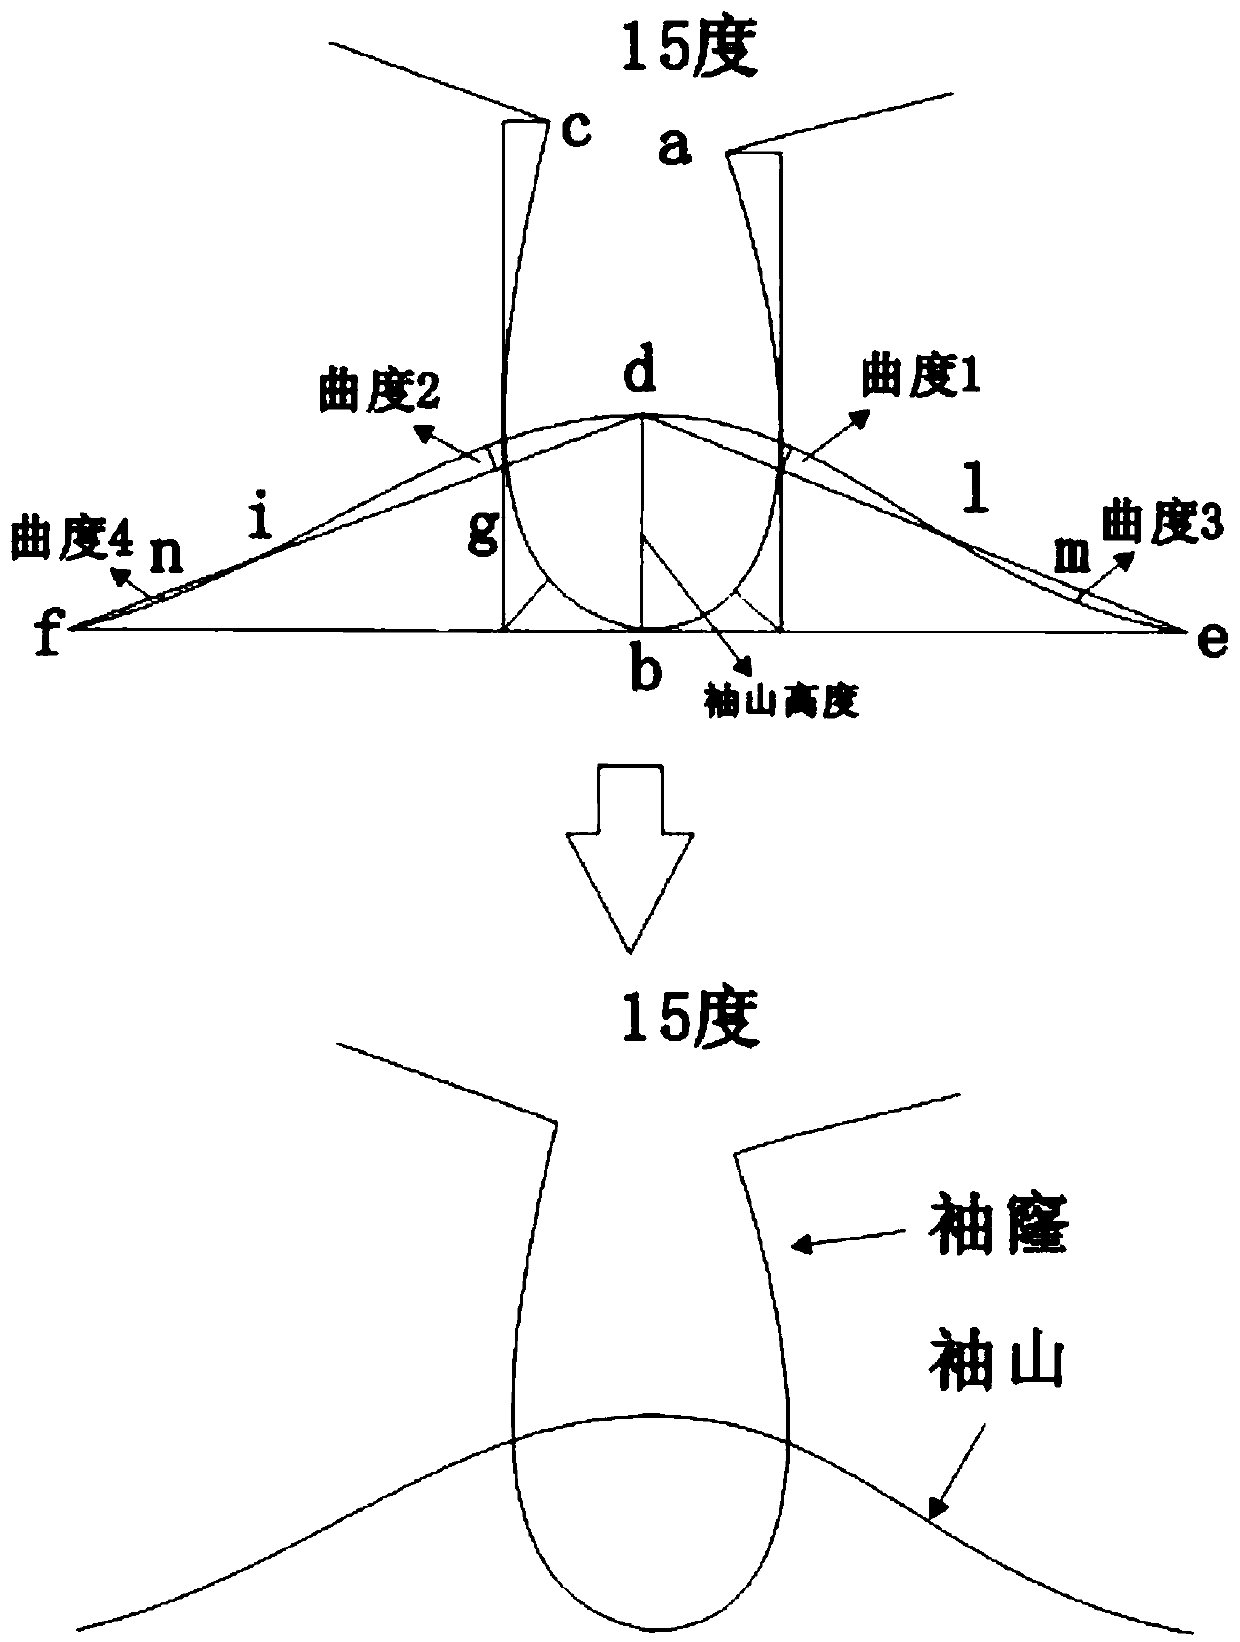 Method for drawing clothing armhole and sleeves